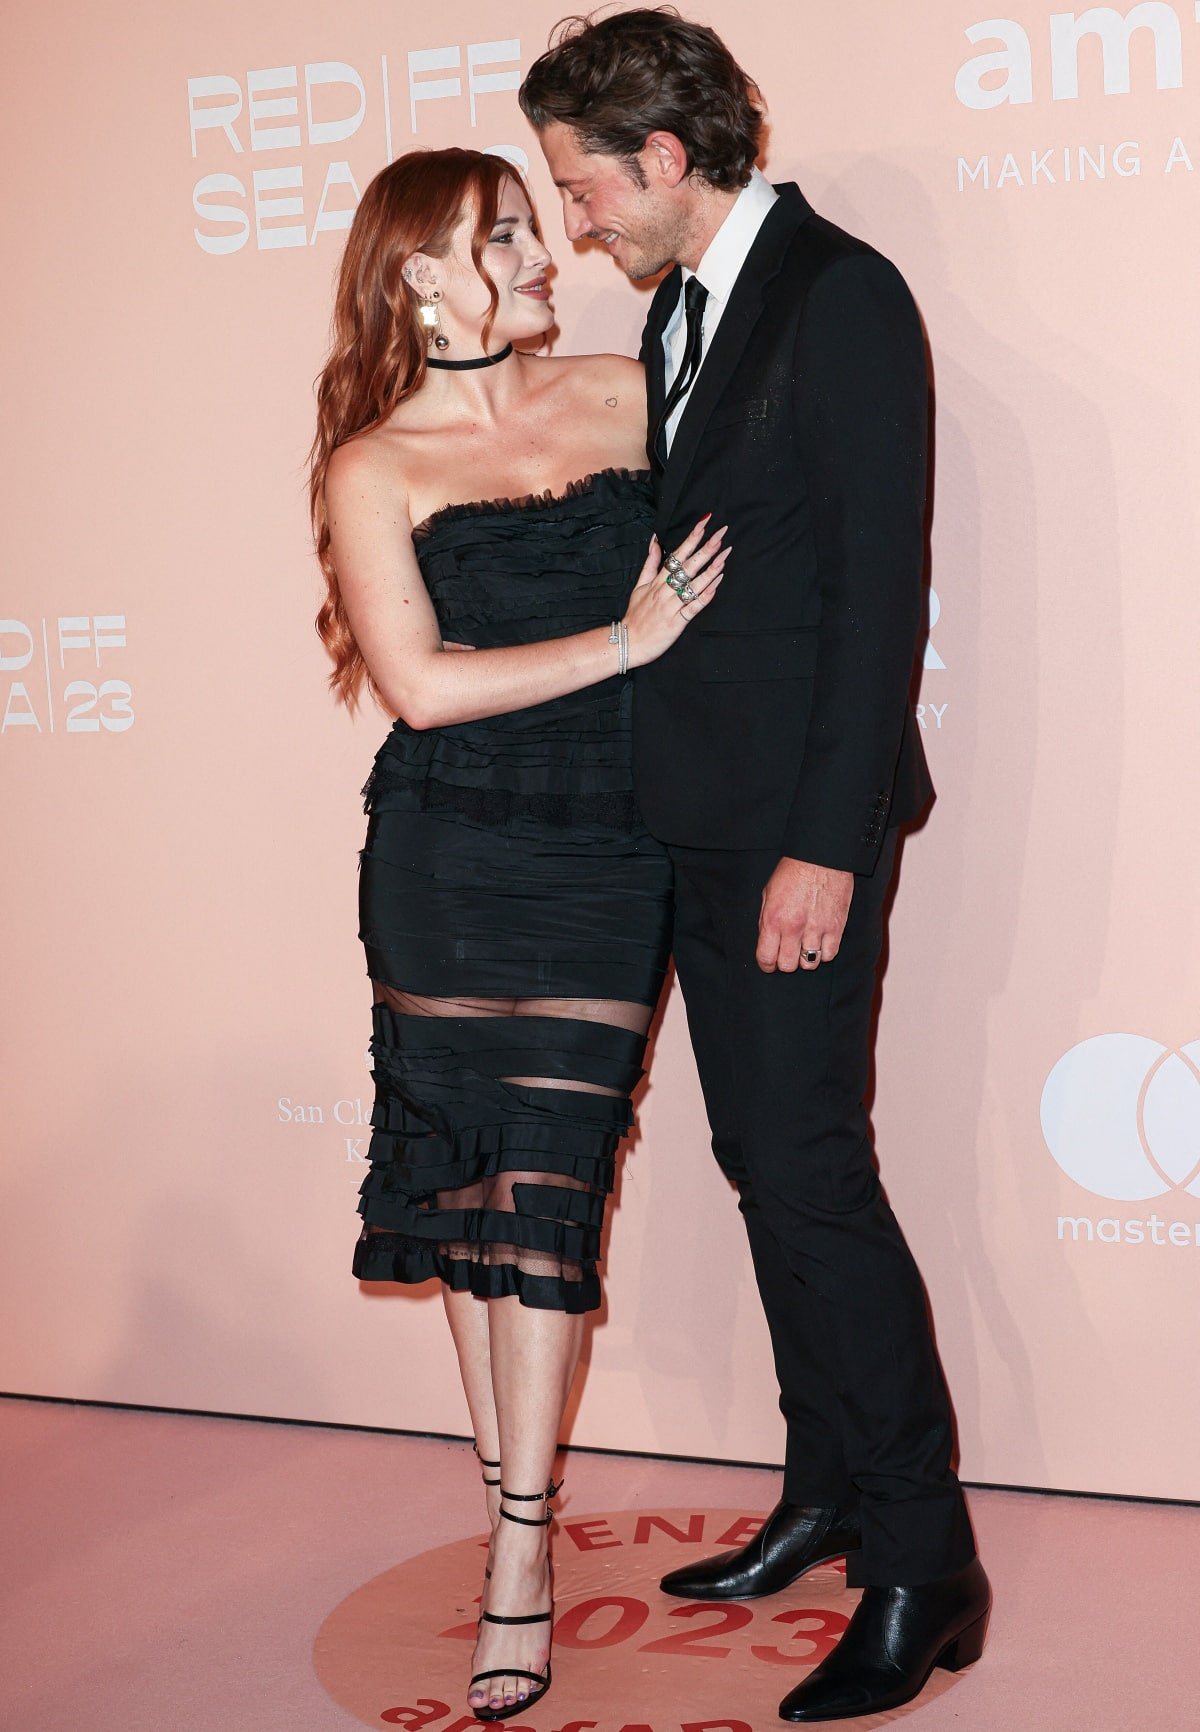 Bella Thorne and fiancé Mark Emms looking all loved up at the amfAR Gala